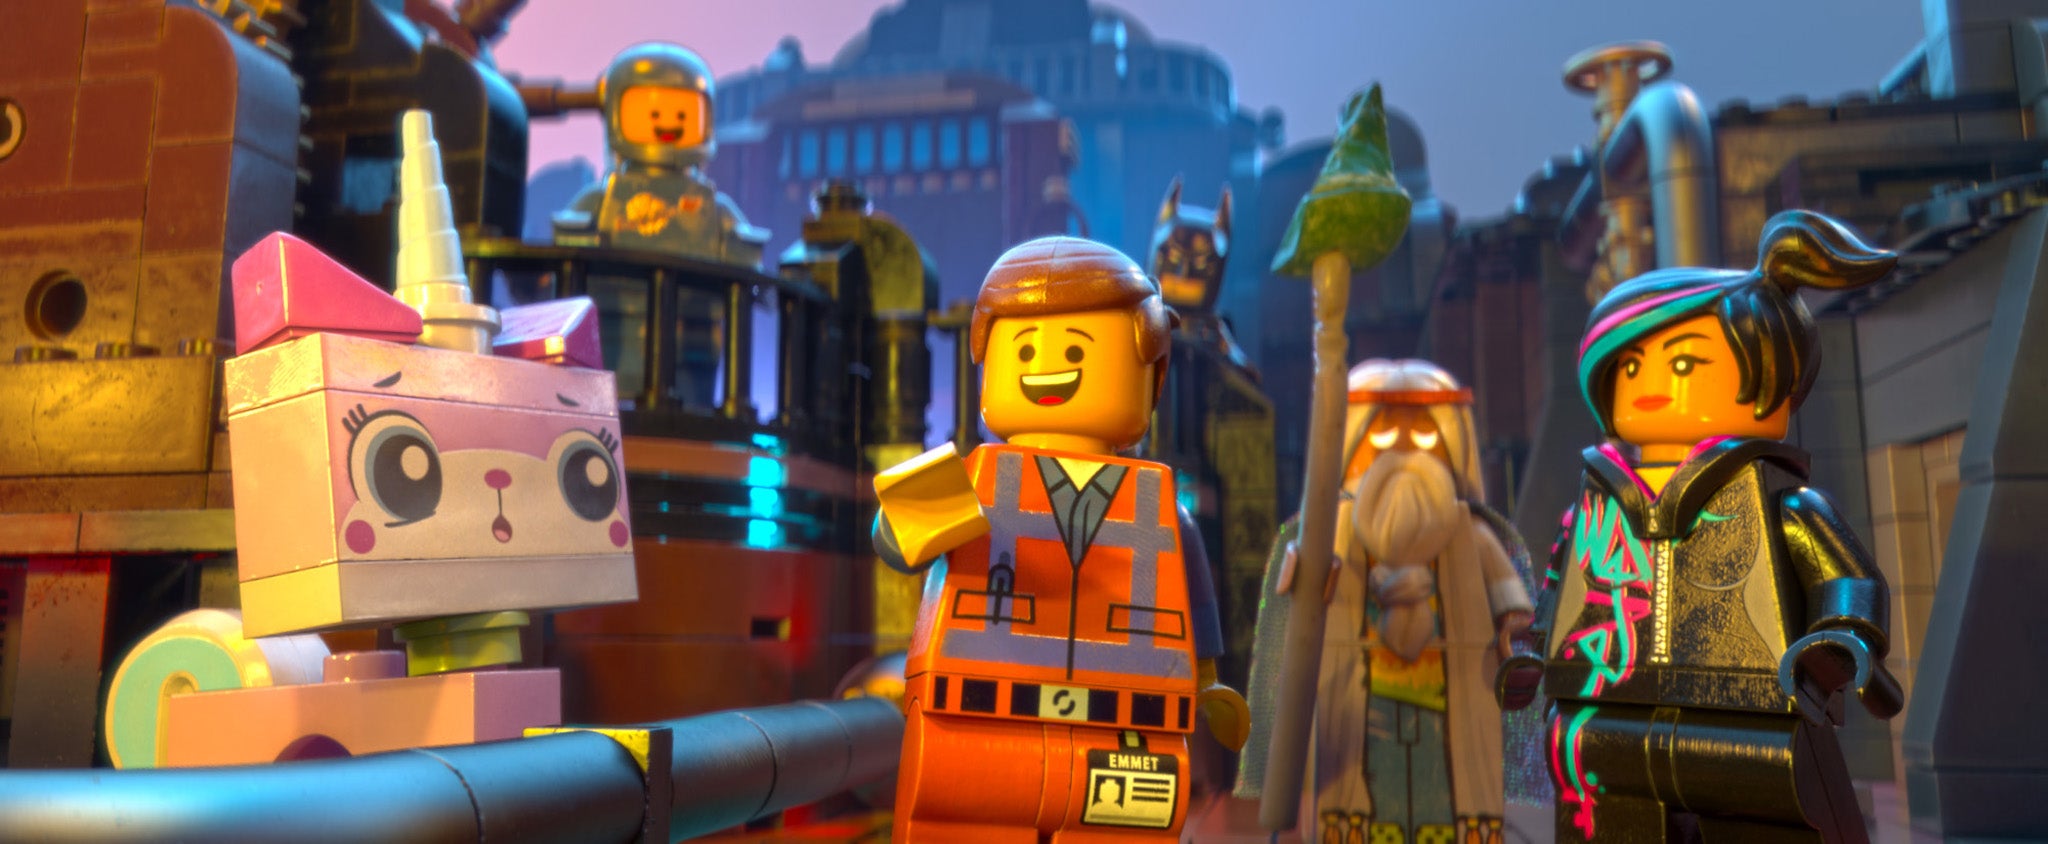 A scene from 'The Lego Movie'